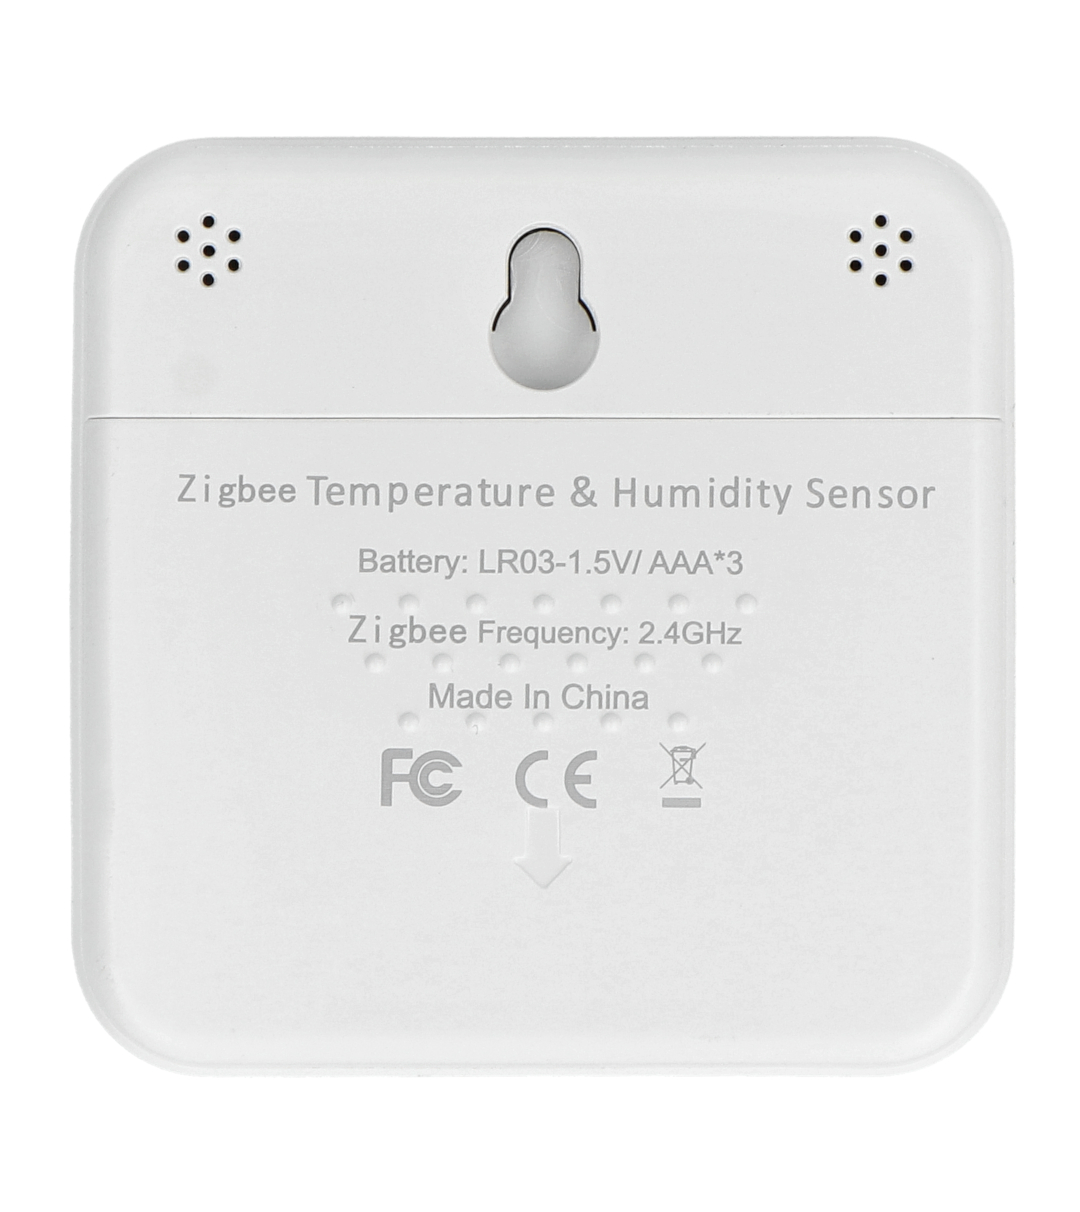 MOES WiFi Smart Temperature & Humidity Sensor with LCD Screen